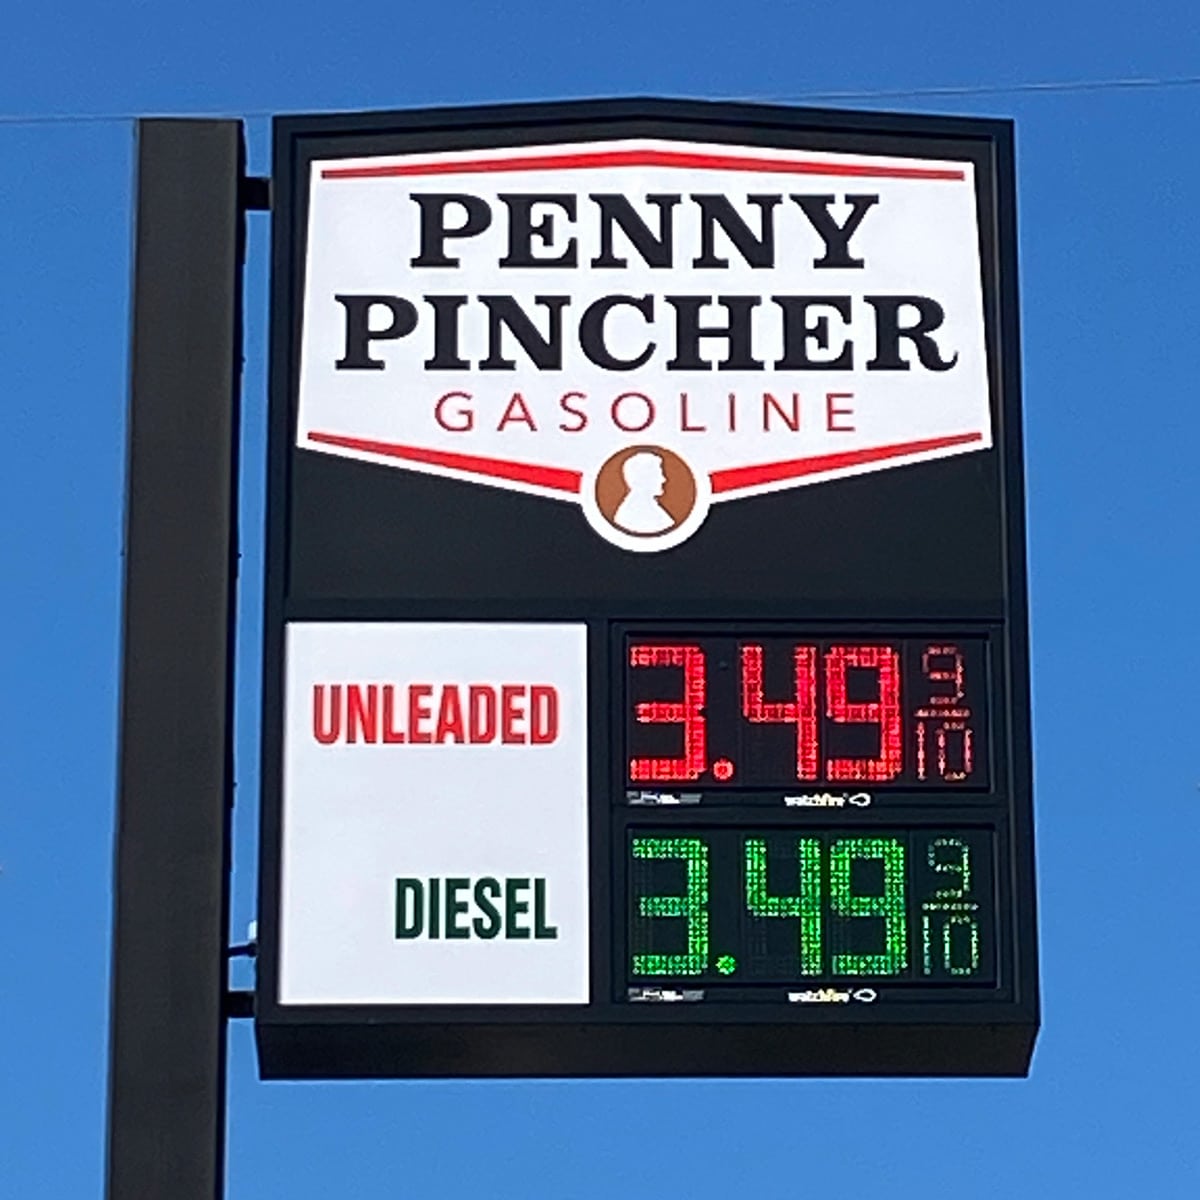 Shirtcliff Oil Company gas station price sign in Riddle, Oregon called Penny Pincher.